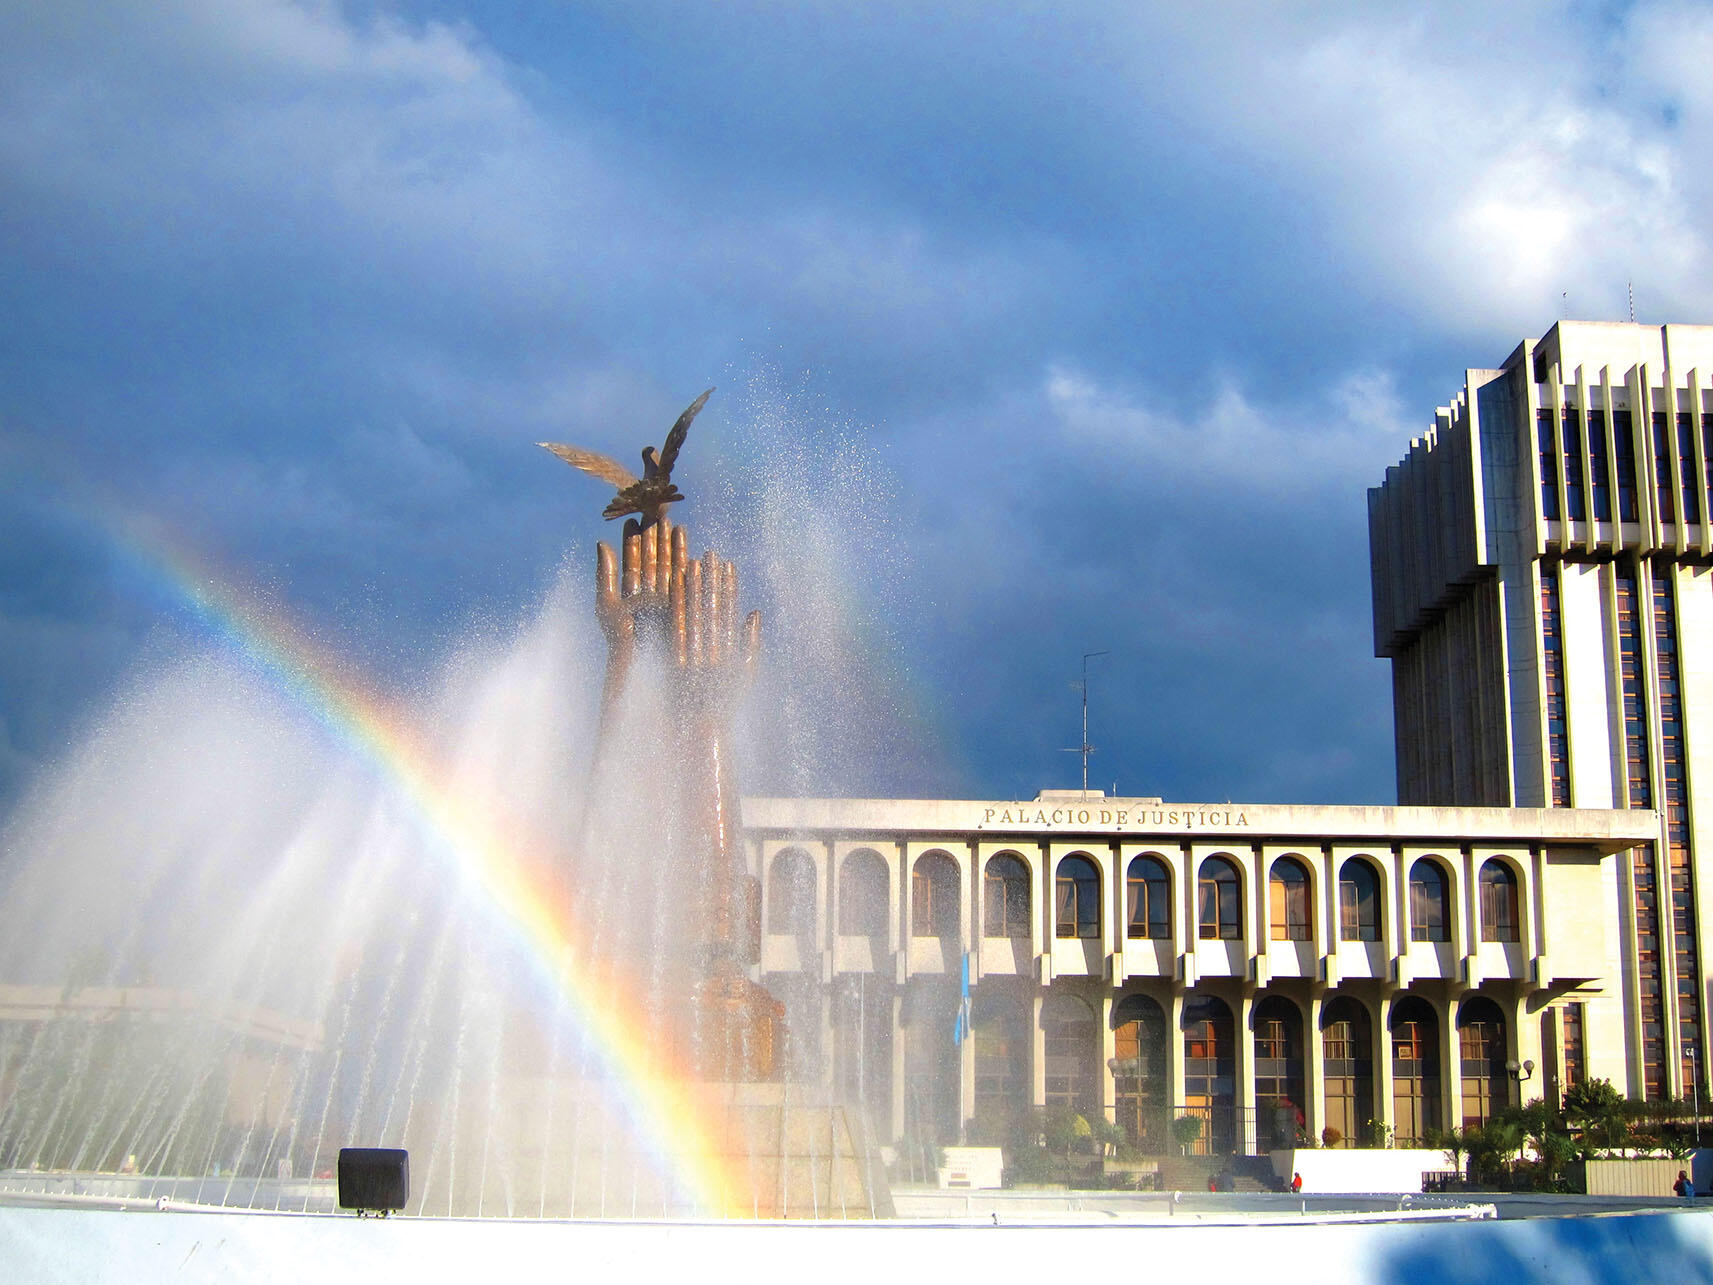 Water sprays and rainbows form in the “Hands of Peace” Fountain commemorating the signing of peace accords in 1996 lies just in front of the Palace of Justice in Guatemala City. (Photo by Anthony Fontes.)